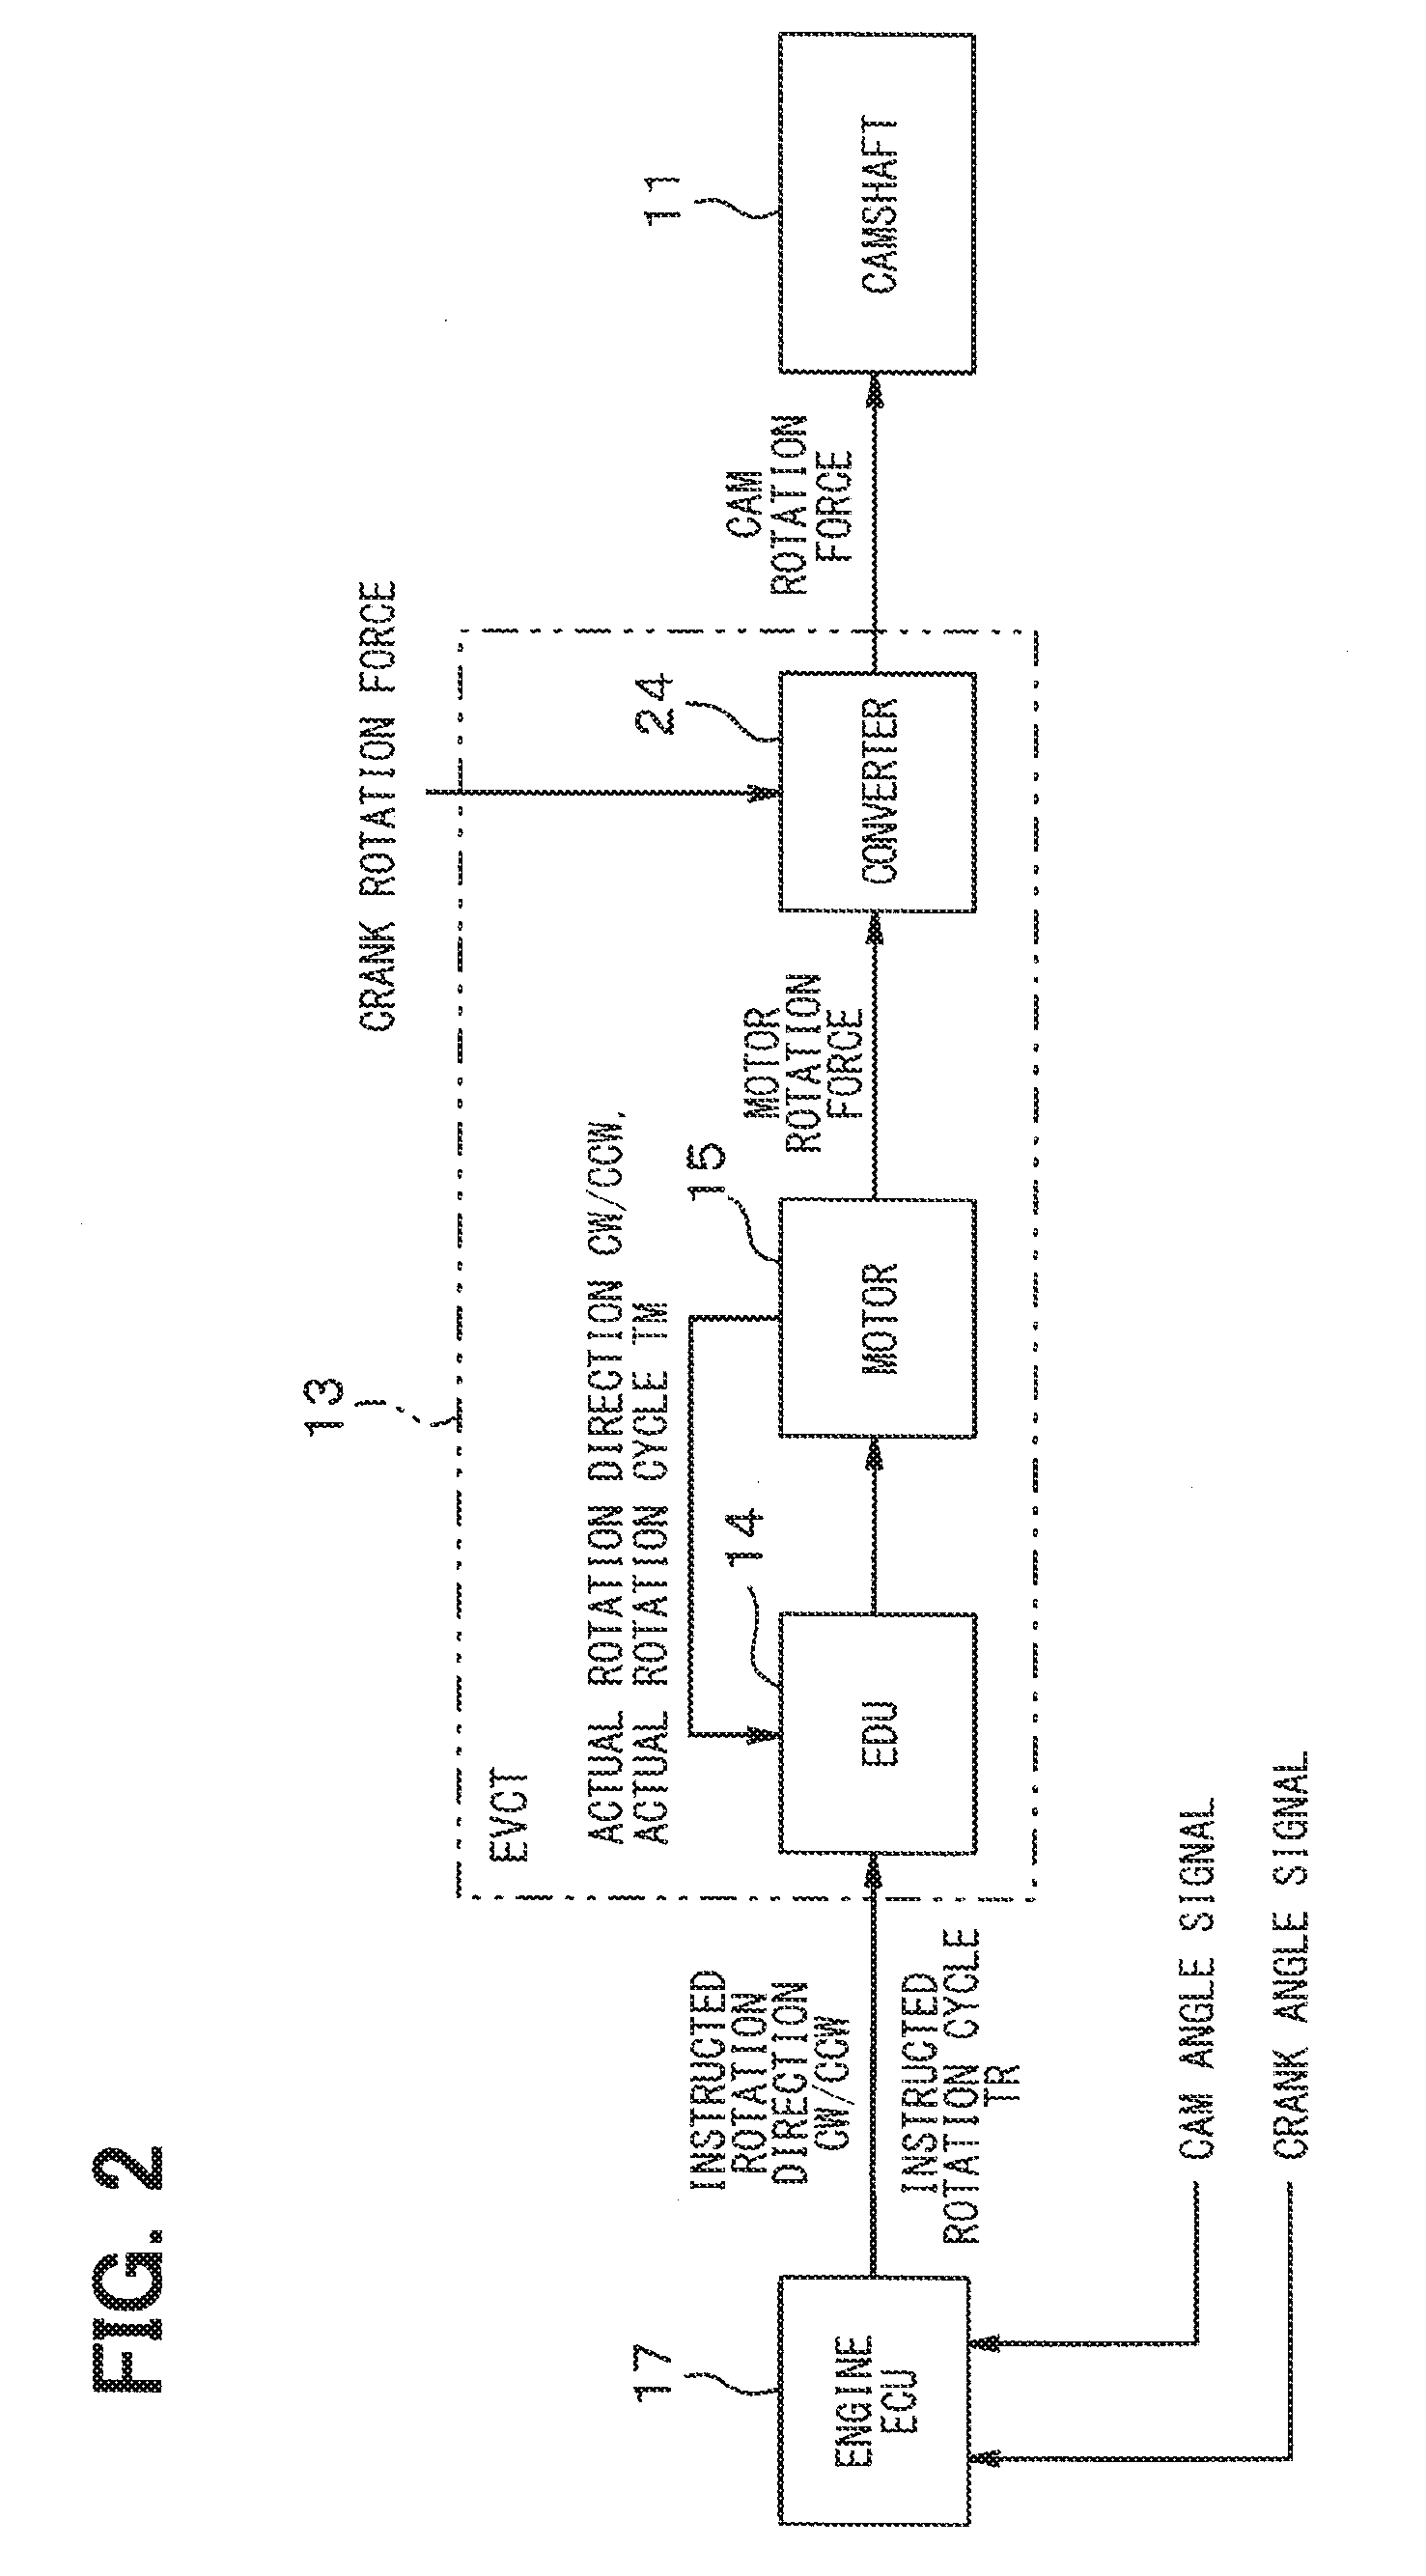 Motor driver of motor for valve timing control of internal combustion engine